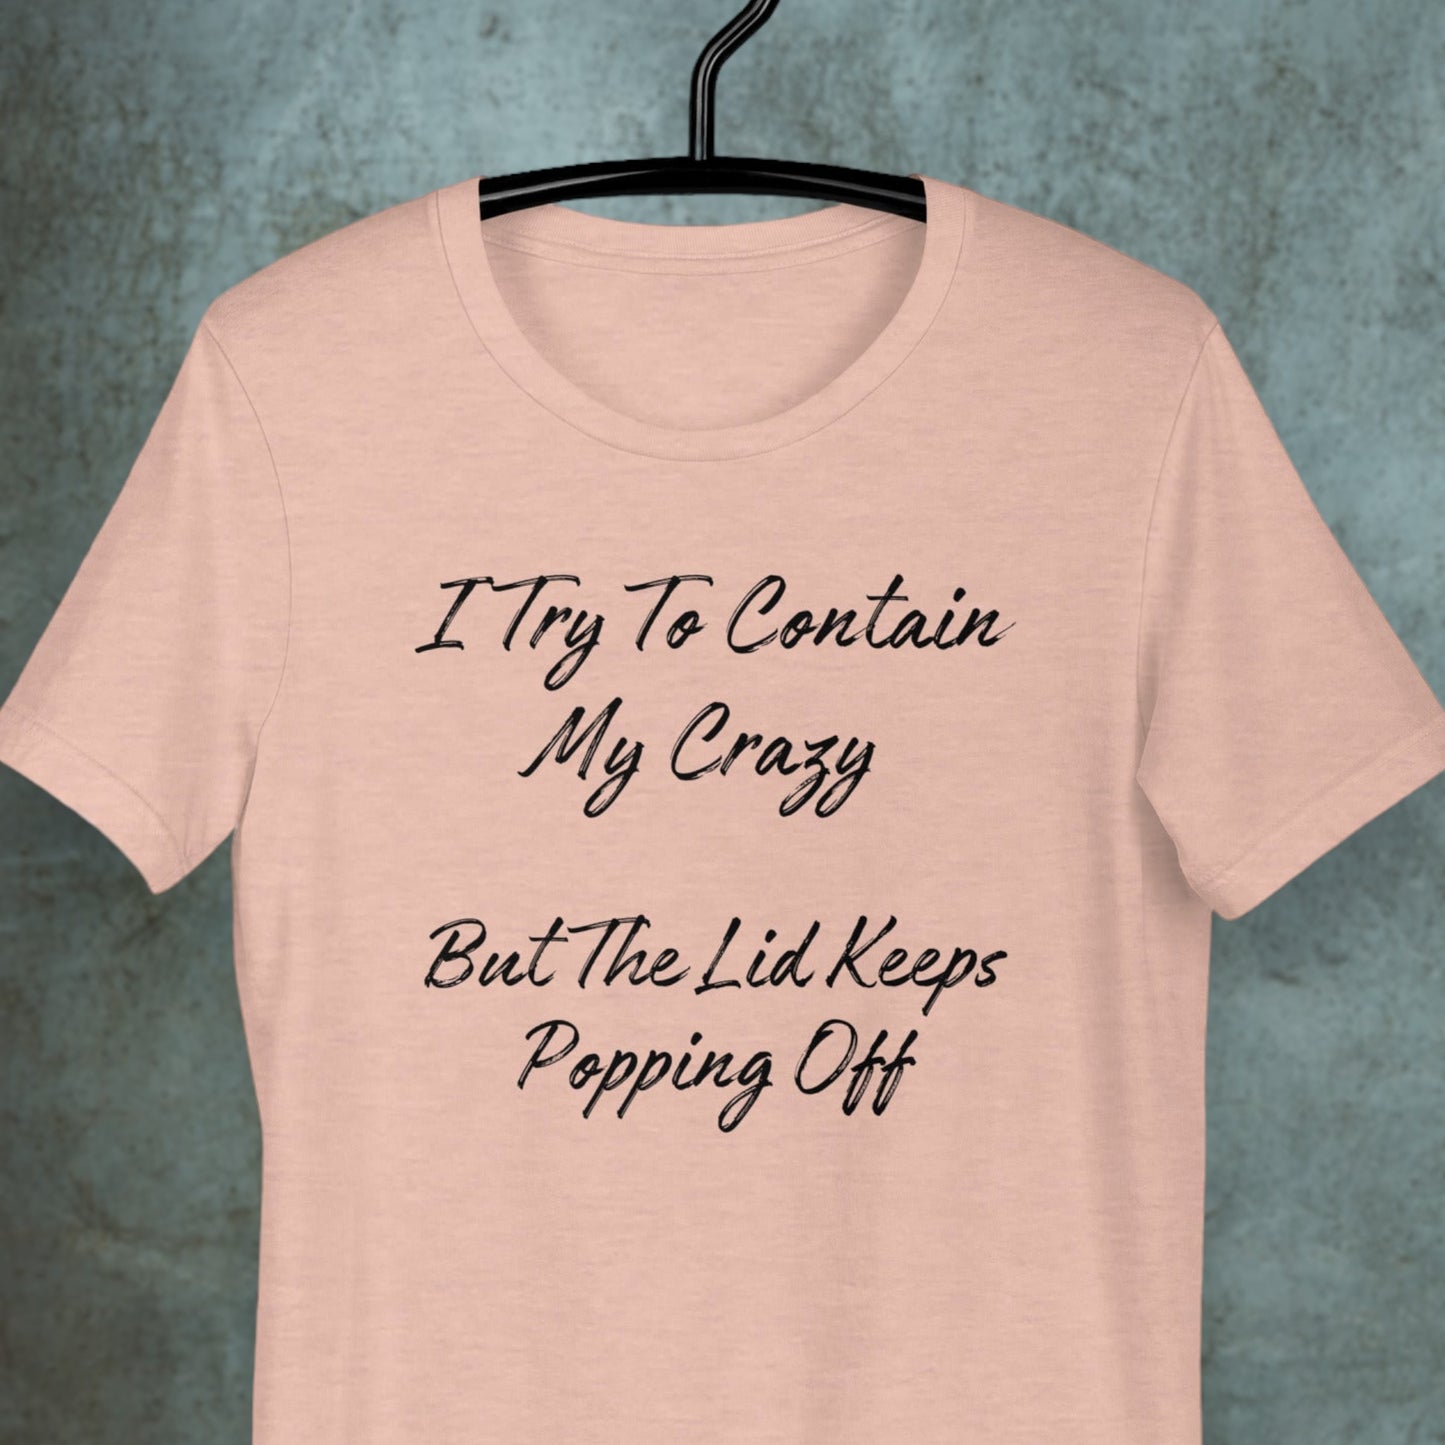 "I Try To Contain My Crazy" T-Shirt - Weave Got Gifts - Unique Gifts You Won’t Find Anywhere Else!